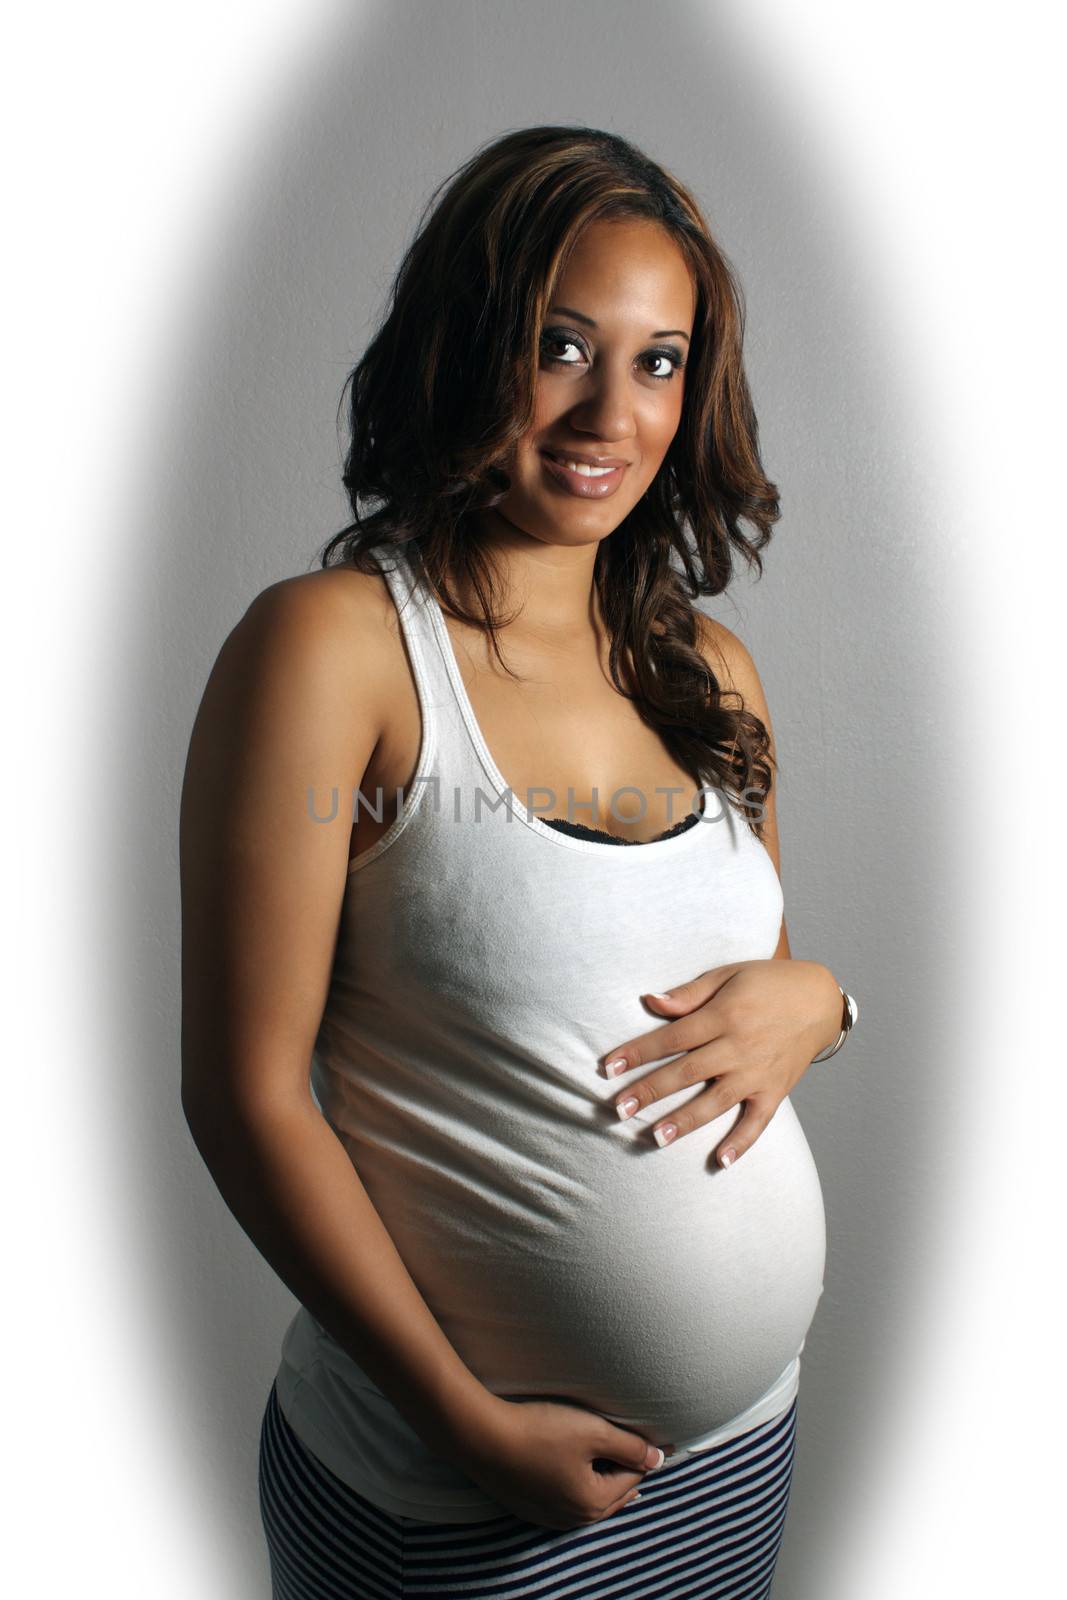 Beautiful Multiracial Woman, 8 Months Pregnant (1) by csproductions